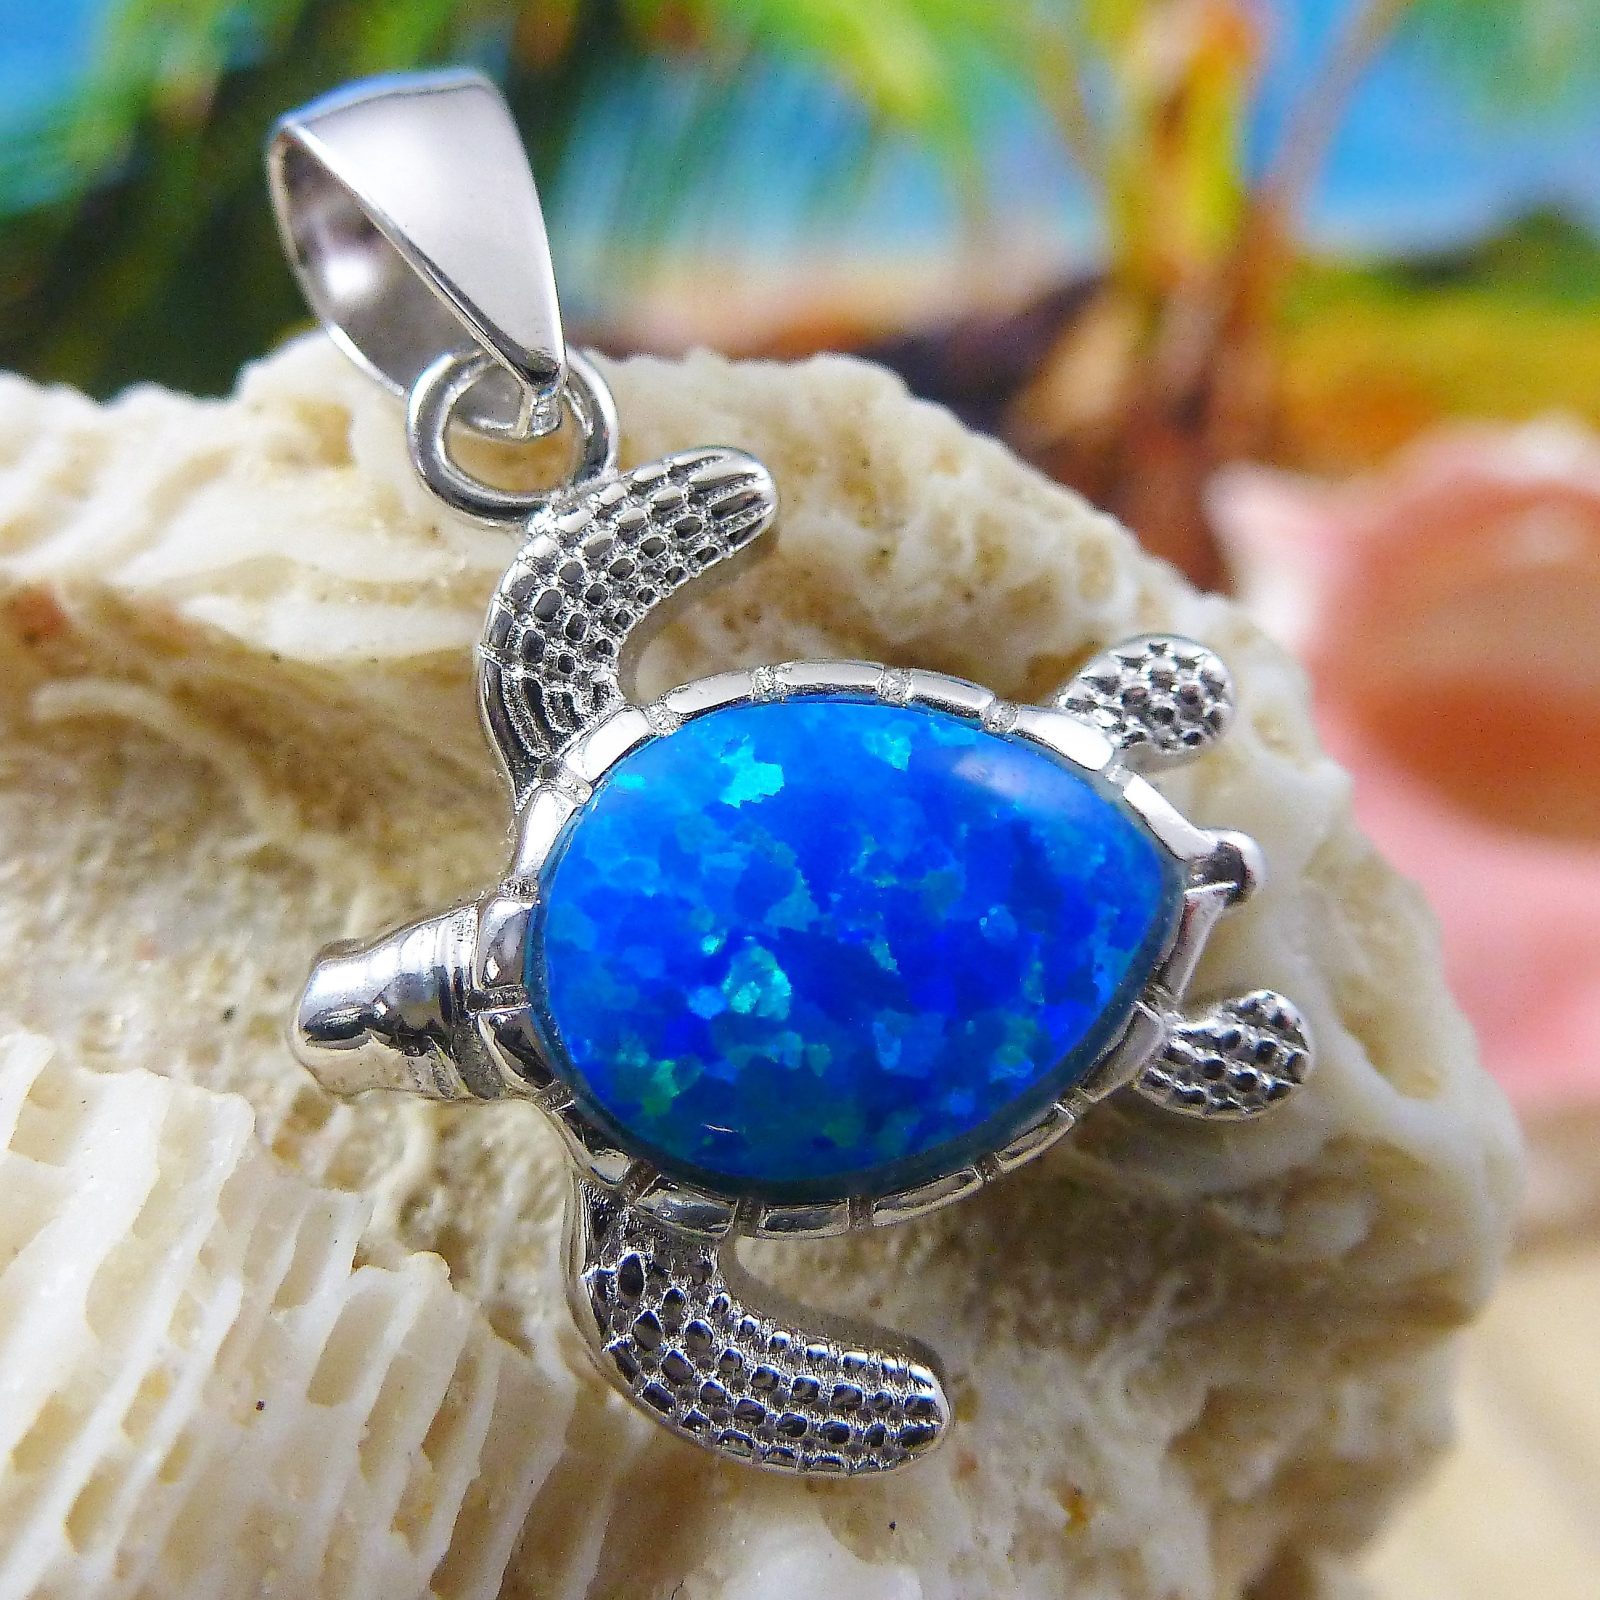 Pretty Hawaiian Sea Turtle Necklace, Sterling Silver Blue Opal Turtle  Pendant, N6021 Birthday Mother Wife Mom Gift, Island Jewelry - Etsy